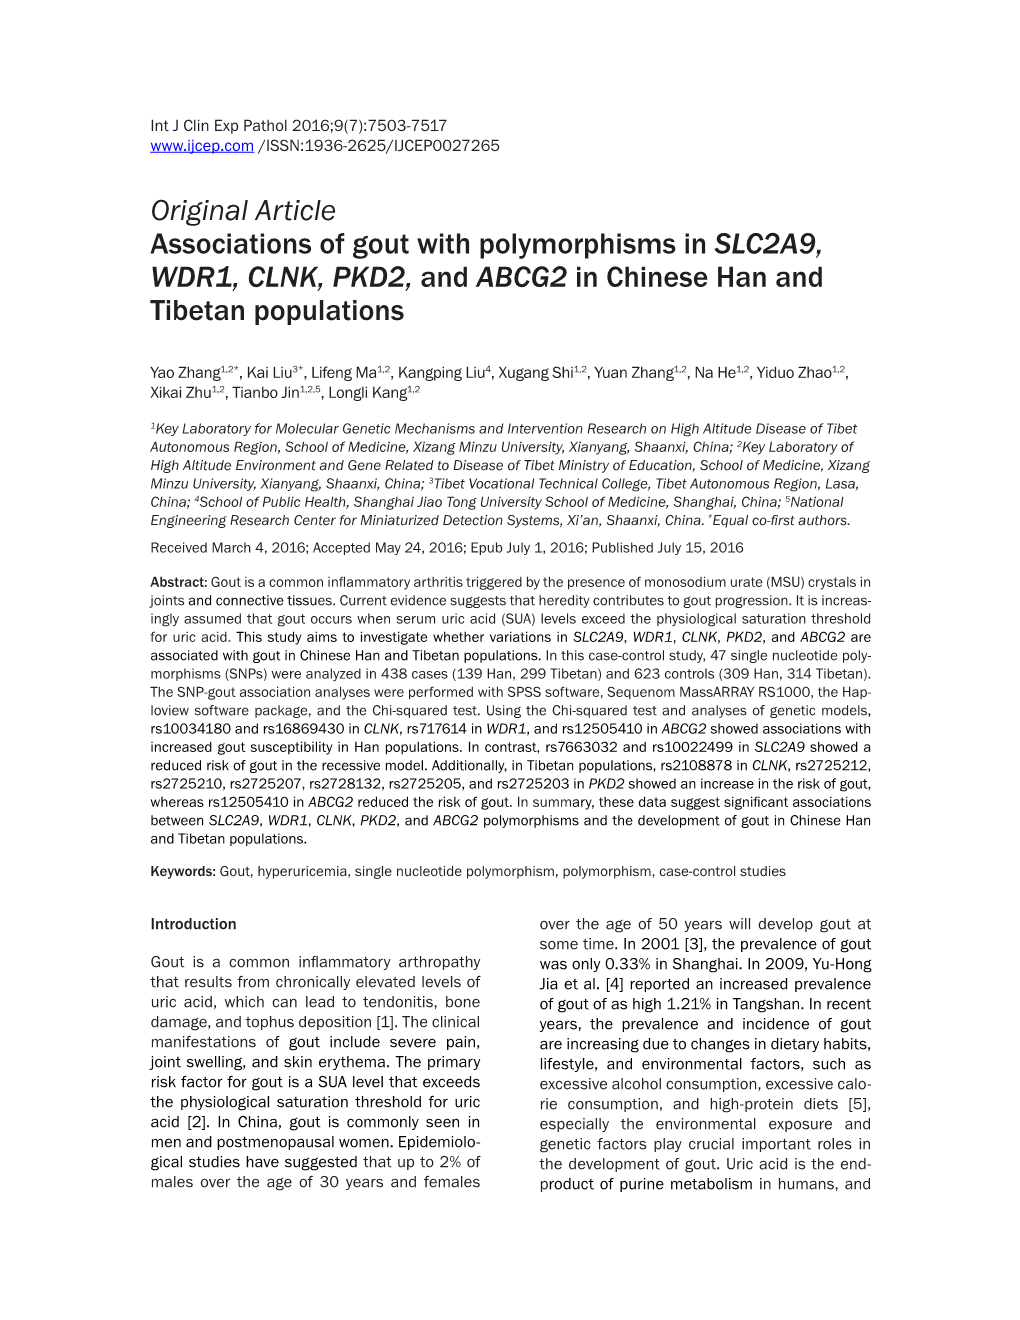 Original Article Associations of Gout with Polymorphisms in SLC2A9, WDR1, CLNK, PKD2, and ABCG2 in Chinese Han and Tibetan Populations